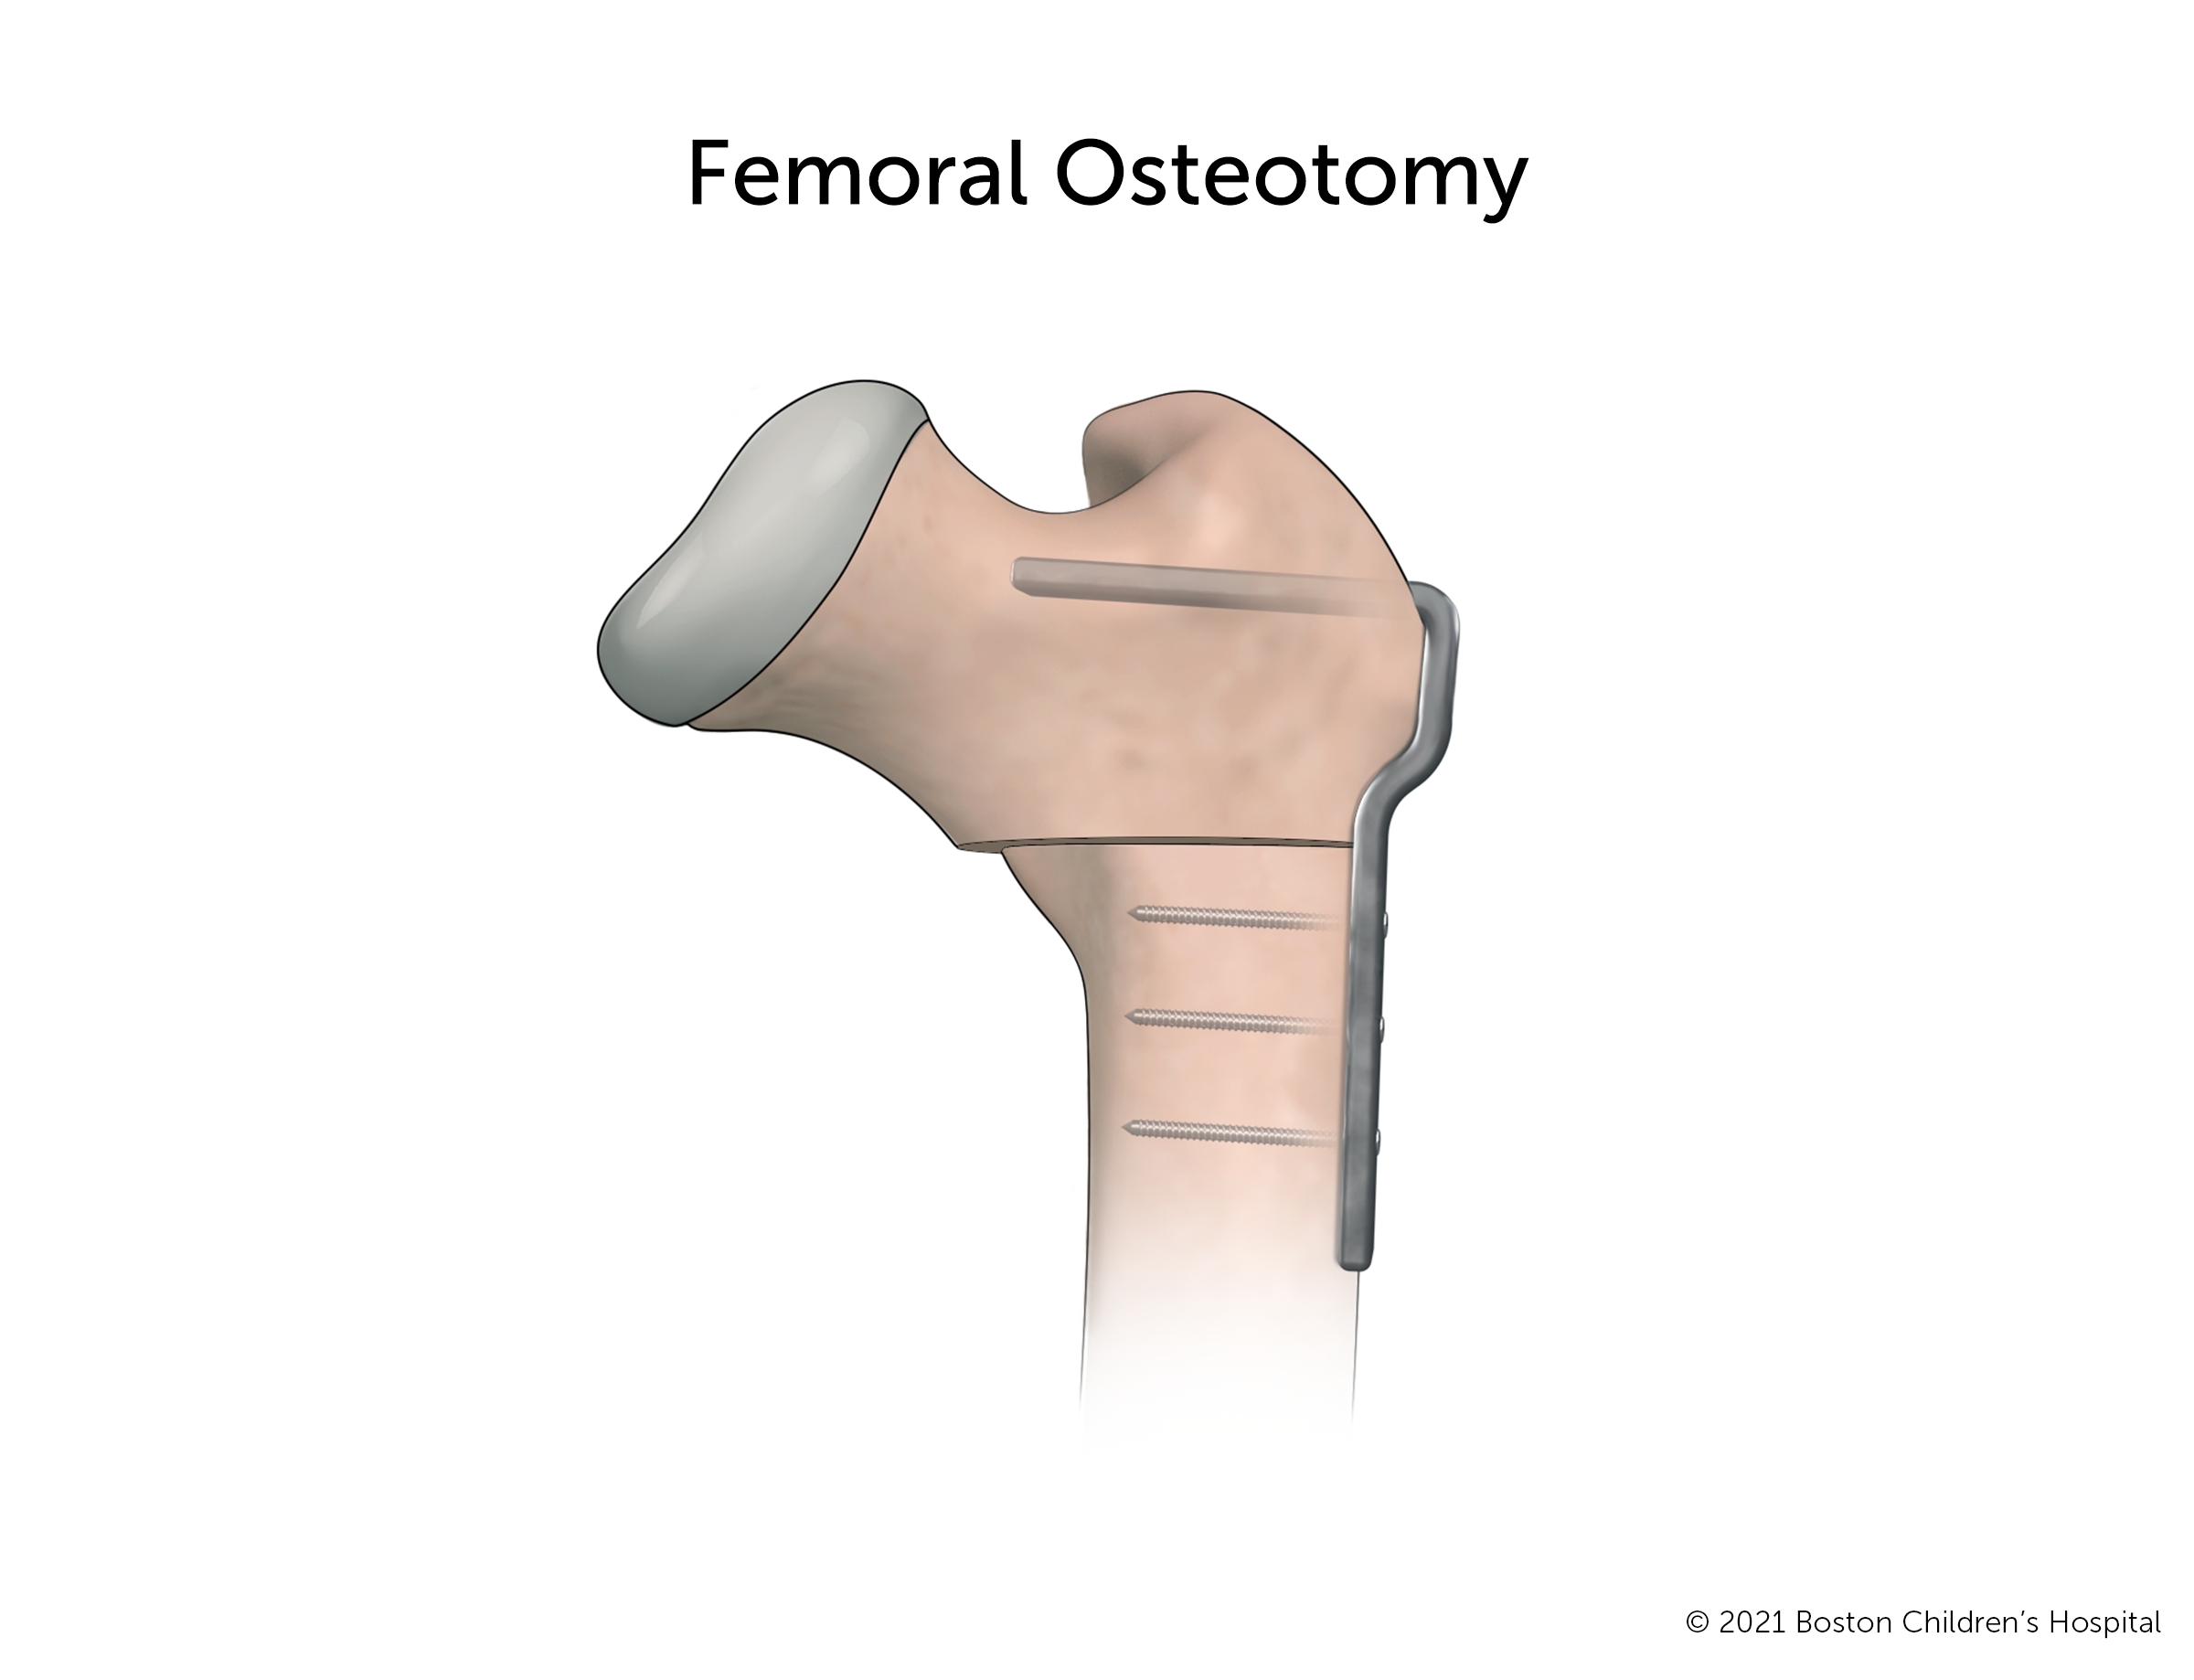 A femoral head after a femoral osteotomy. The bone has been cut and the top of the femoral head has been repositioned so it will fit more securely in the hip socket. The two pieces of bone are held together with a metal plate.